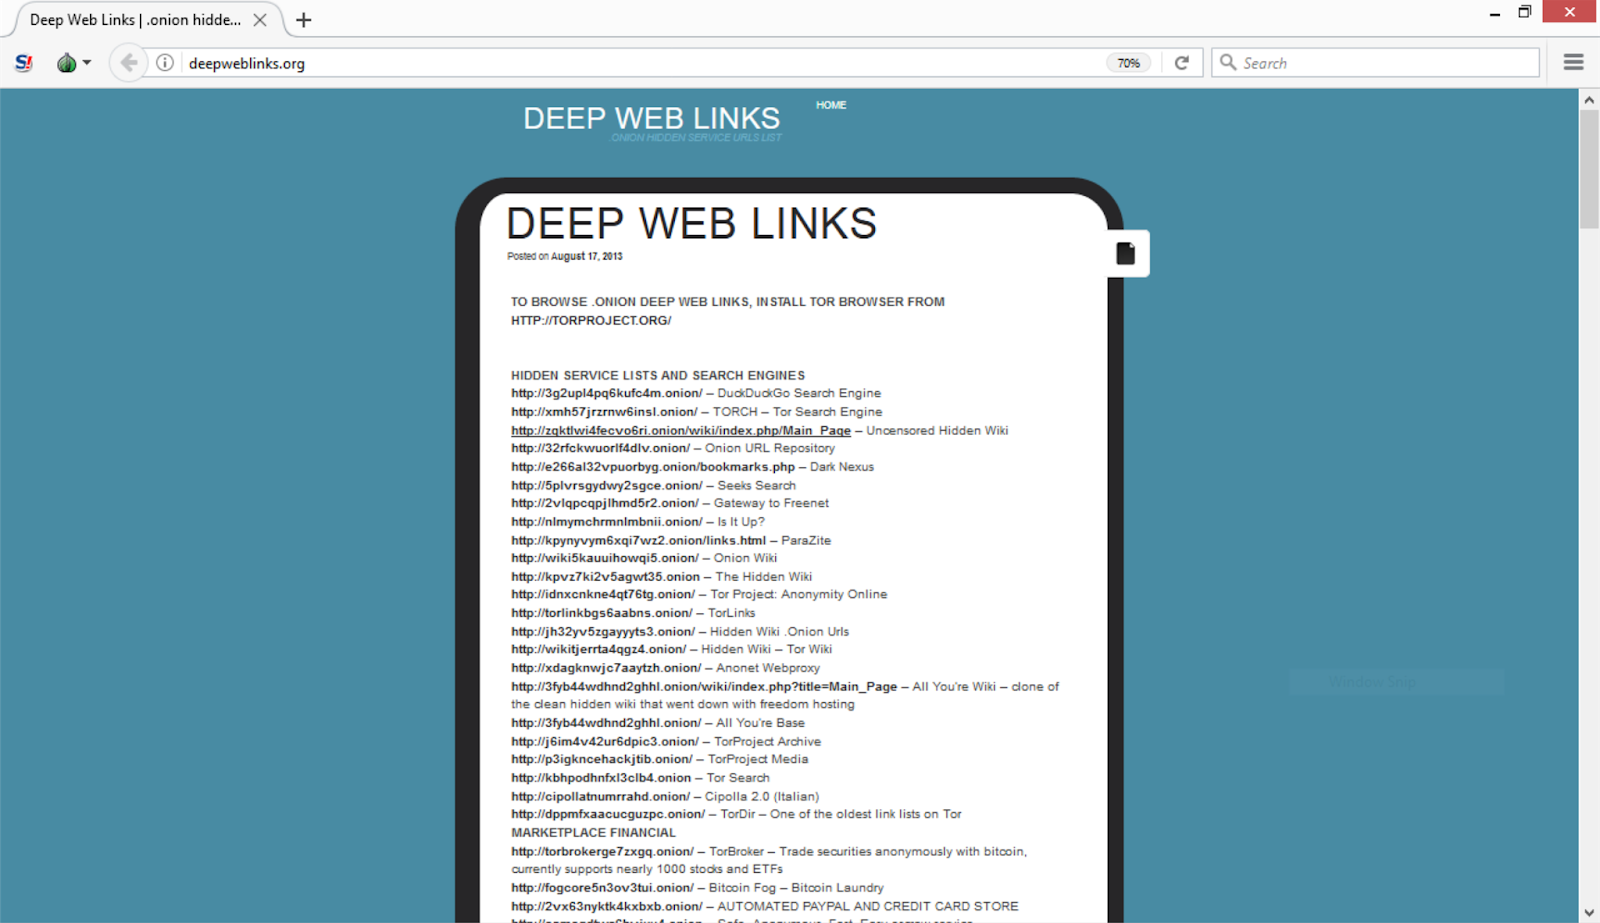 Discovering the Secrets of the Dark Web: A Guide to Accessing the Onion Network